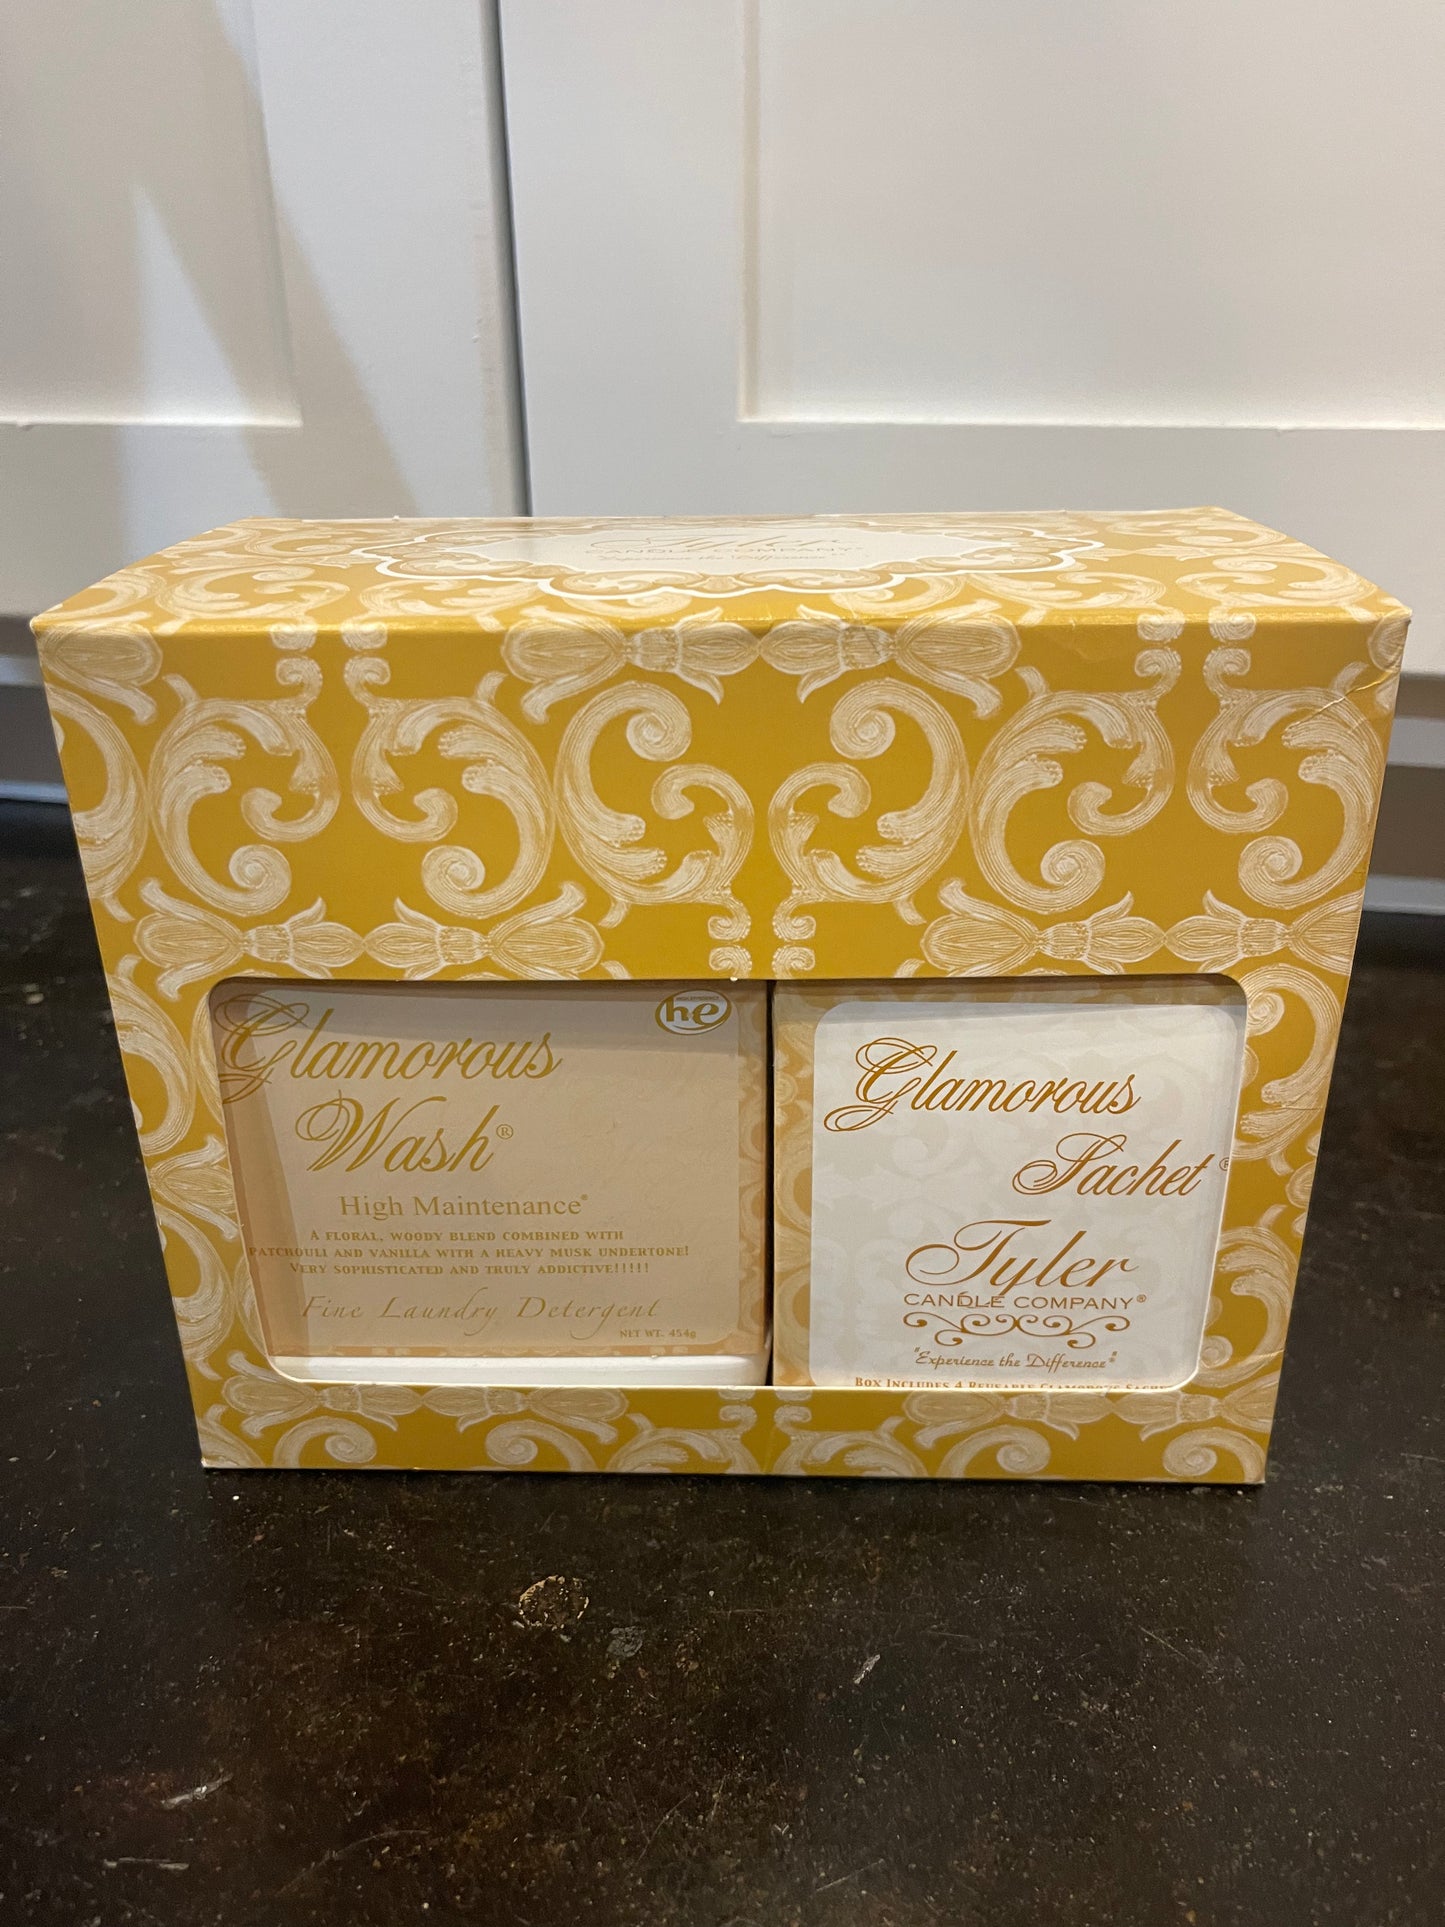 "High Maintenance" Tyler Candle Company Glamorous Gift Suite V.